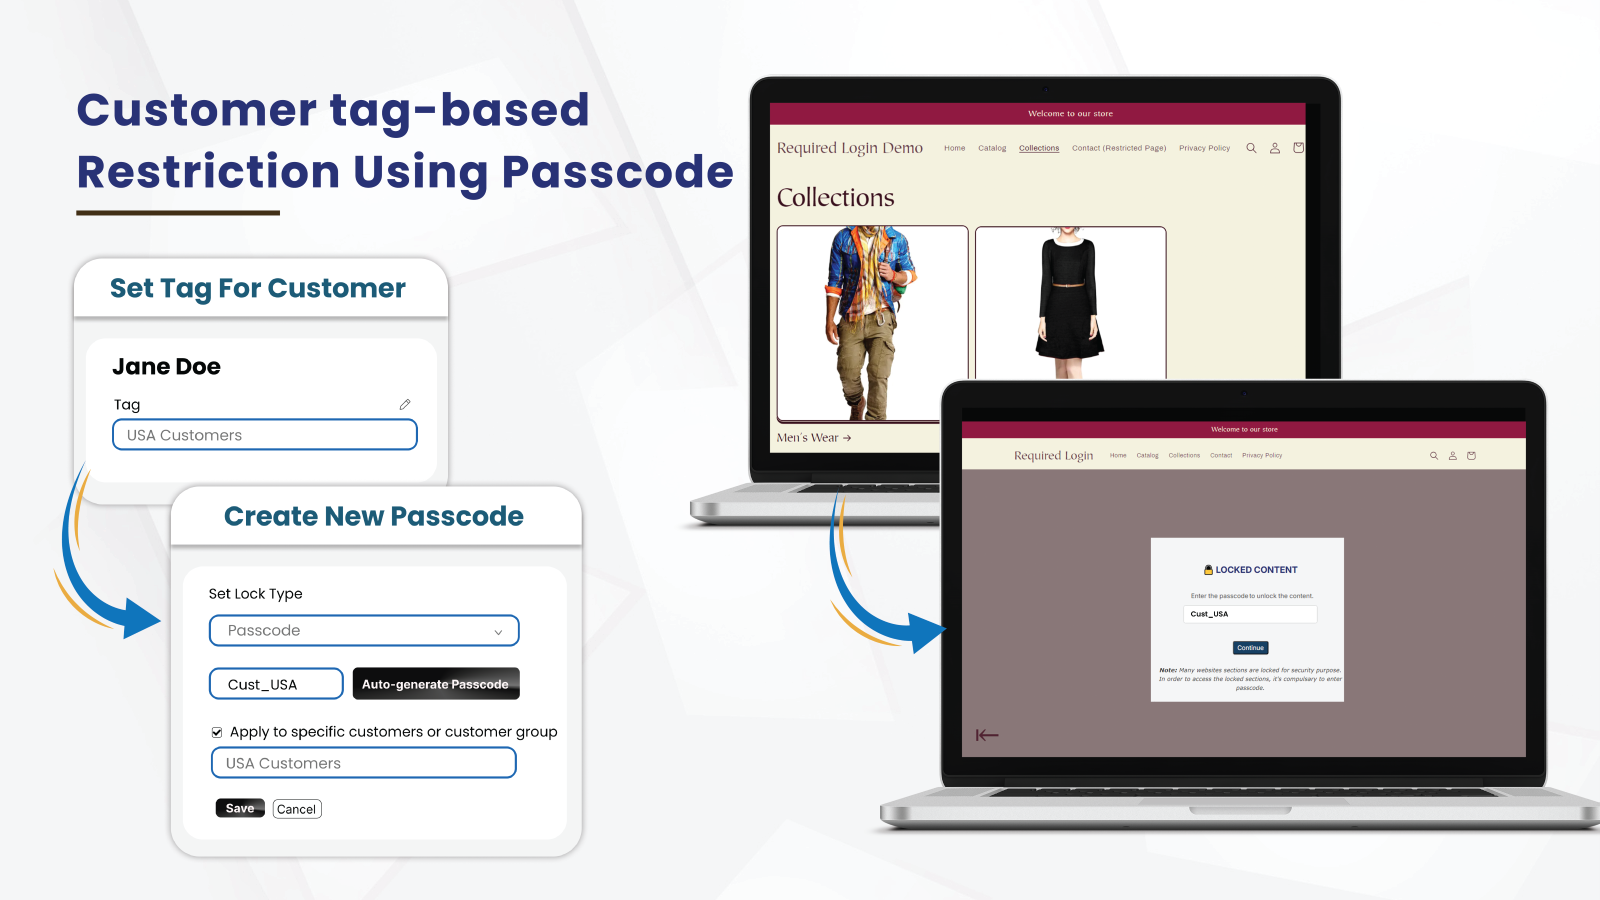 Customer tag-based restriction using passcode